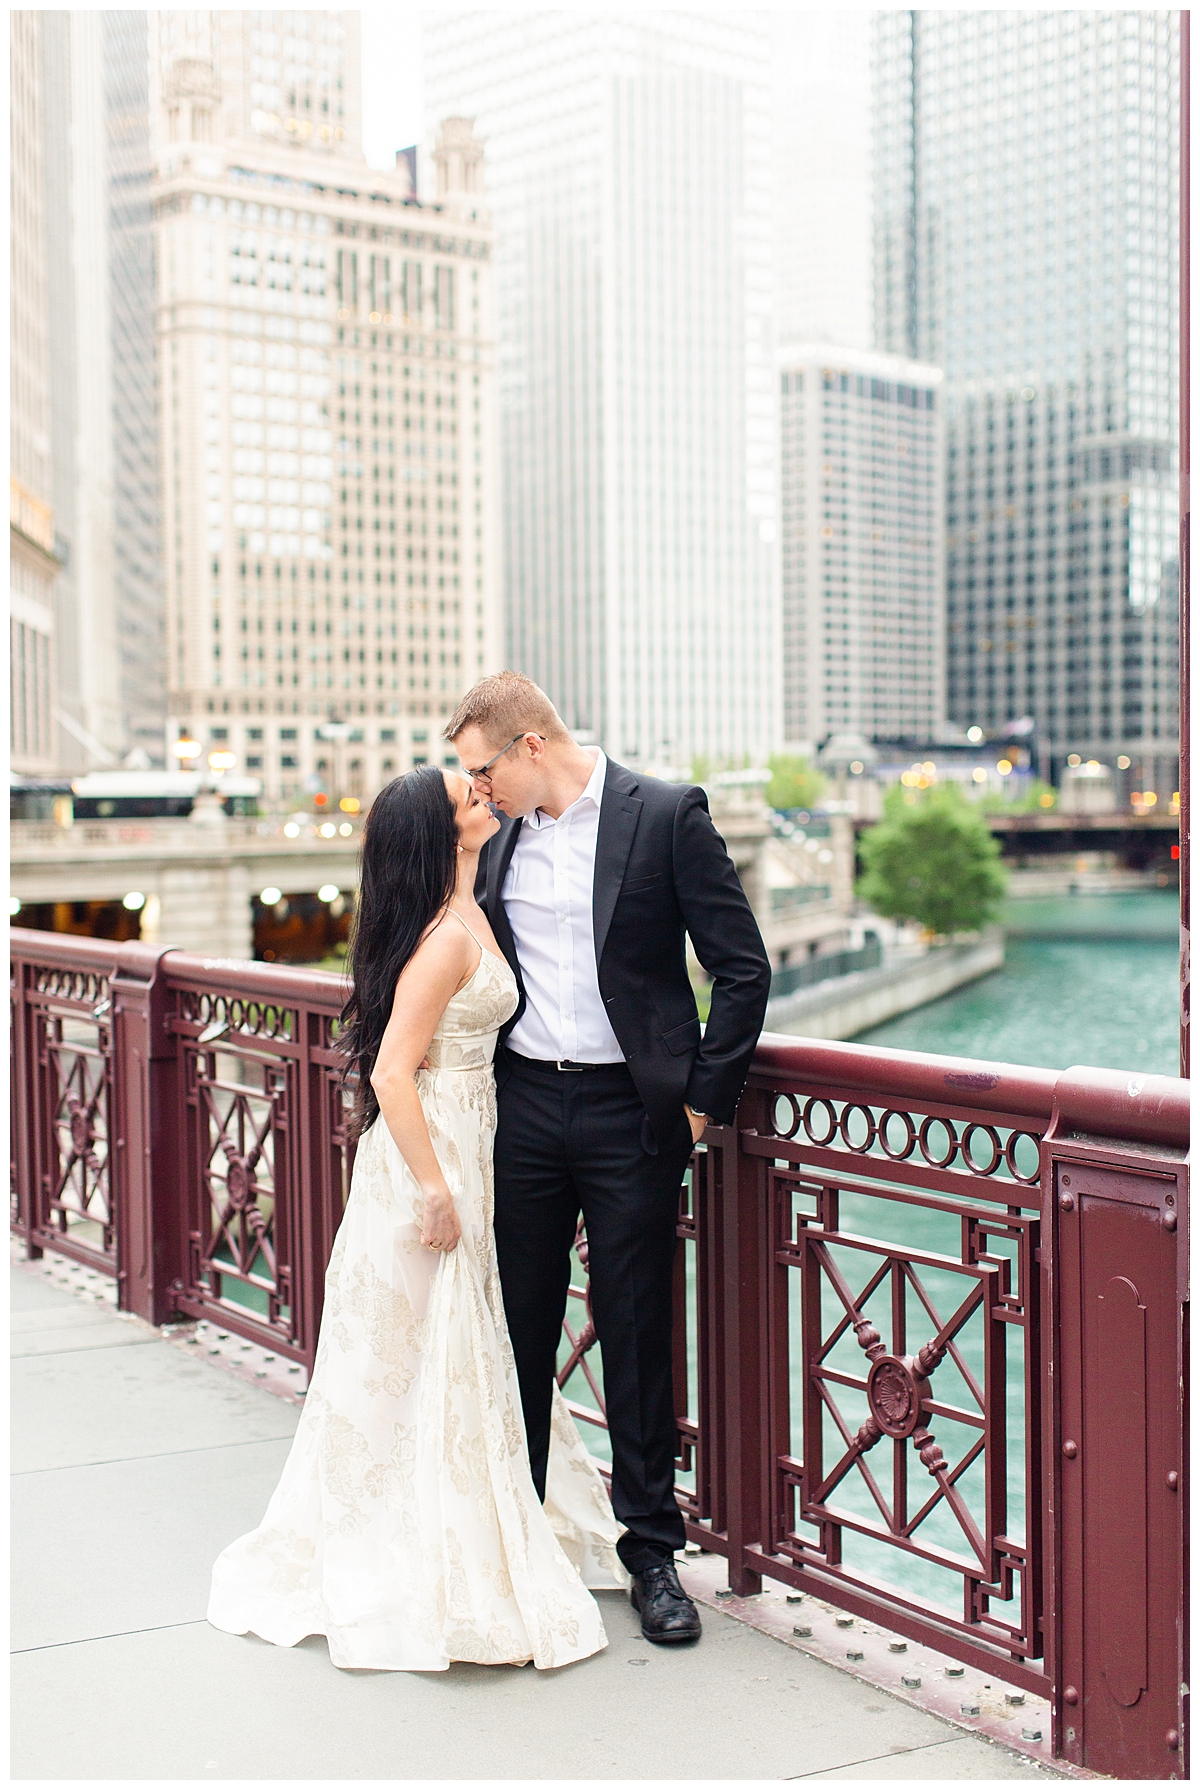 A couple kisses on a red bridge outside of the Wrigley building in Chicago. This is their engagement picture and they are dressed very formally. 